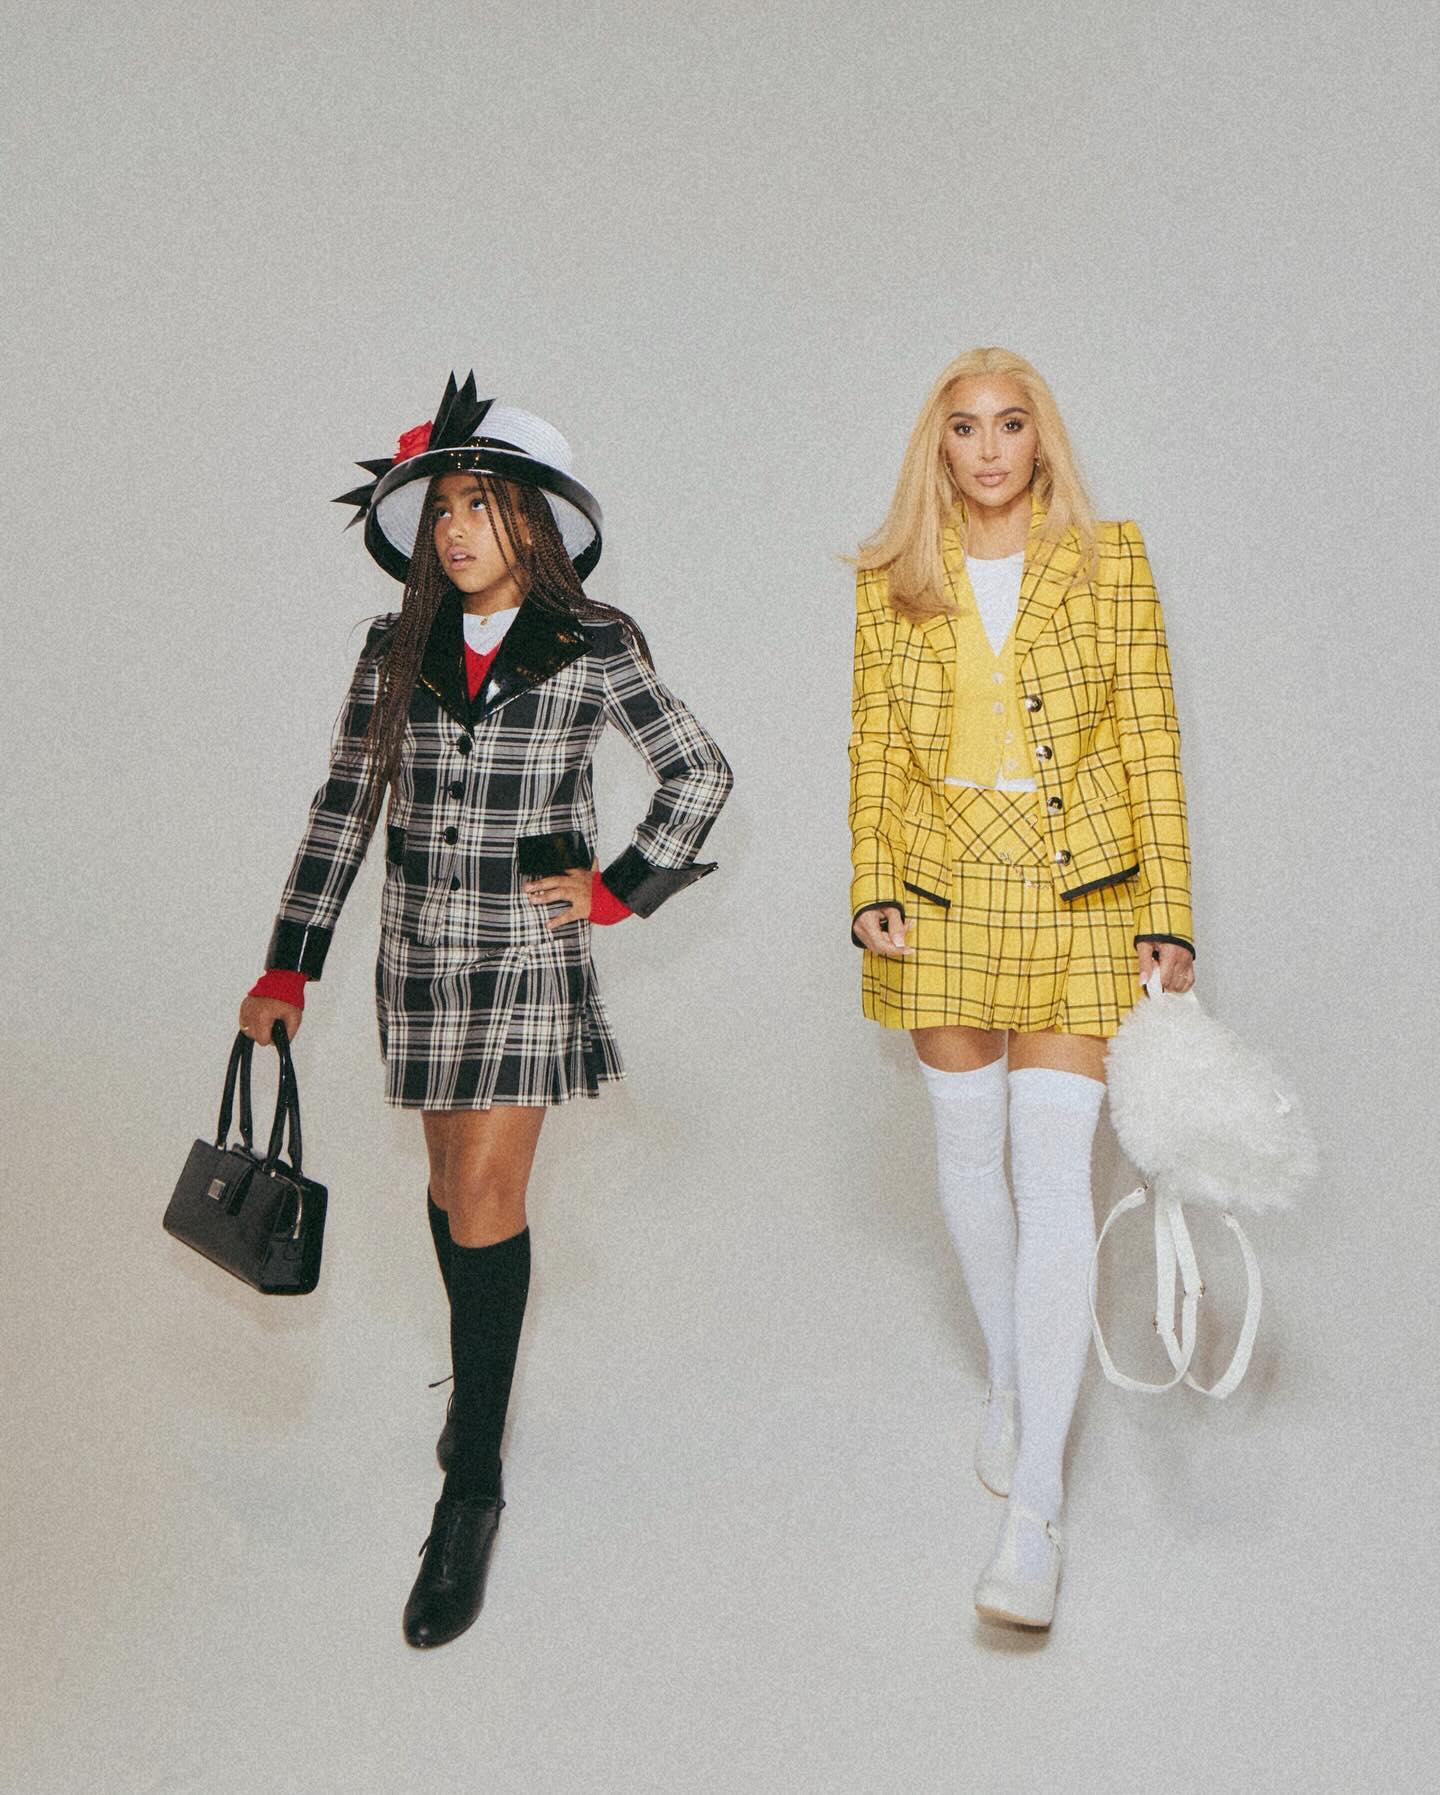 likhoa young kim kardashian with silver hair and north west suddenly shared photos recreating their favorite characters on halloween 6540d9db3ebd2 Young Kim Kardashian With Silver Hair And North West Suddenly Shared Photos Recreating Their Favorite Characters On Halloween 2023.